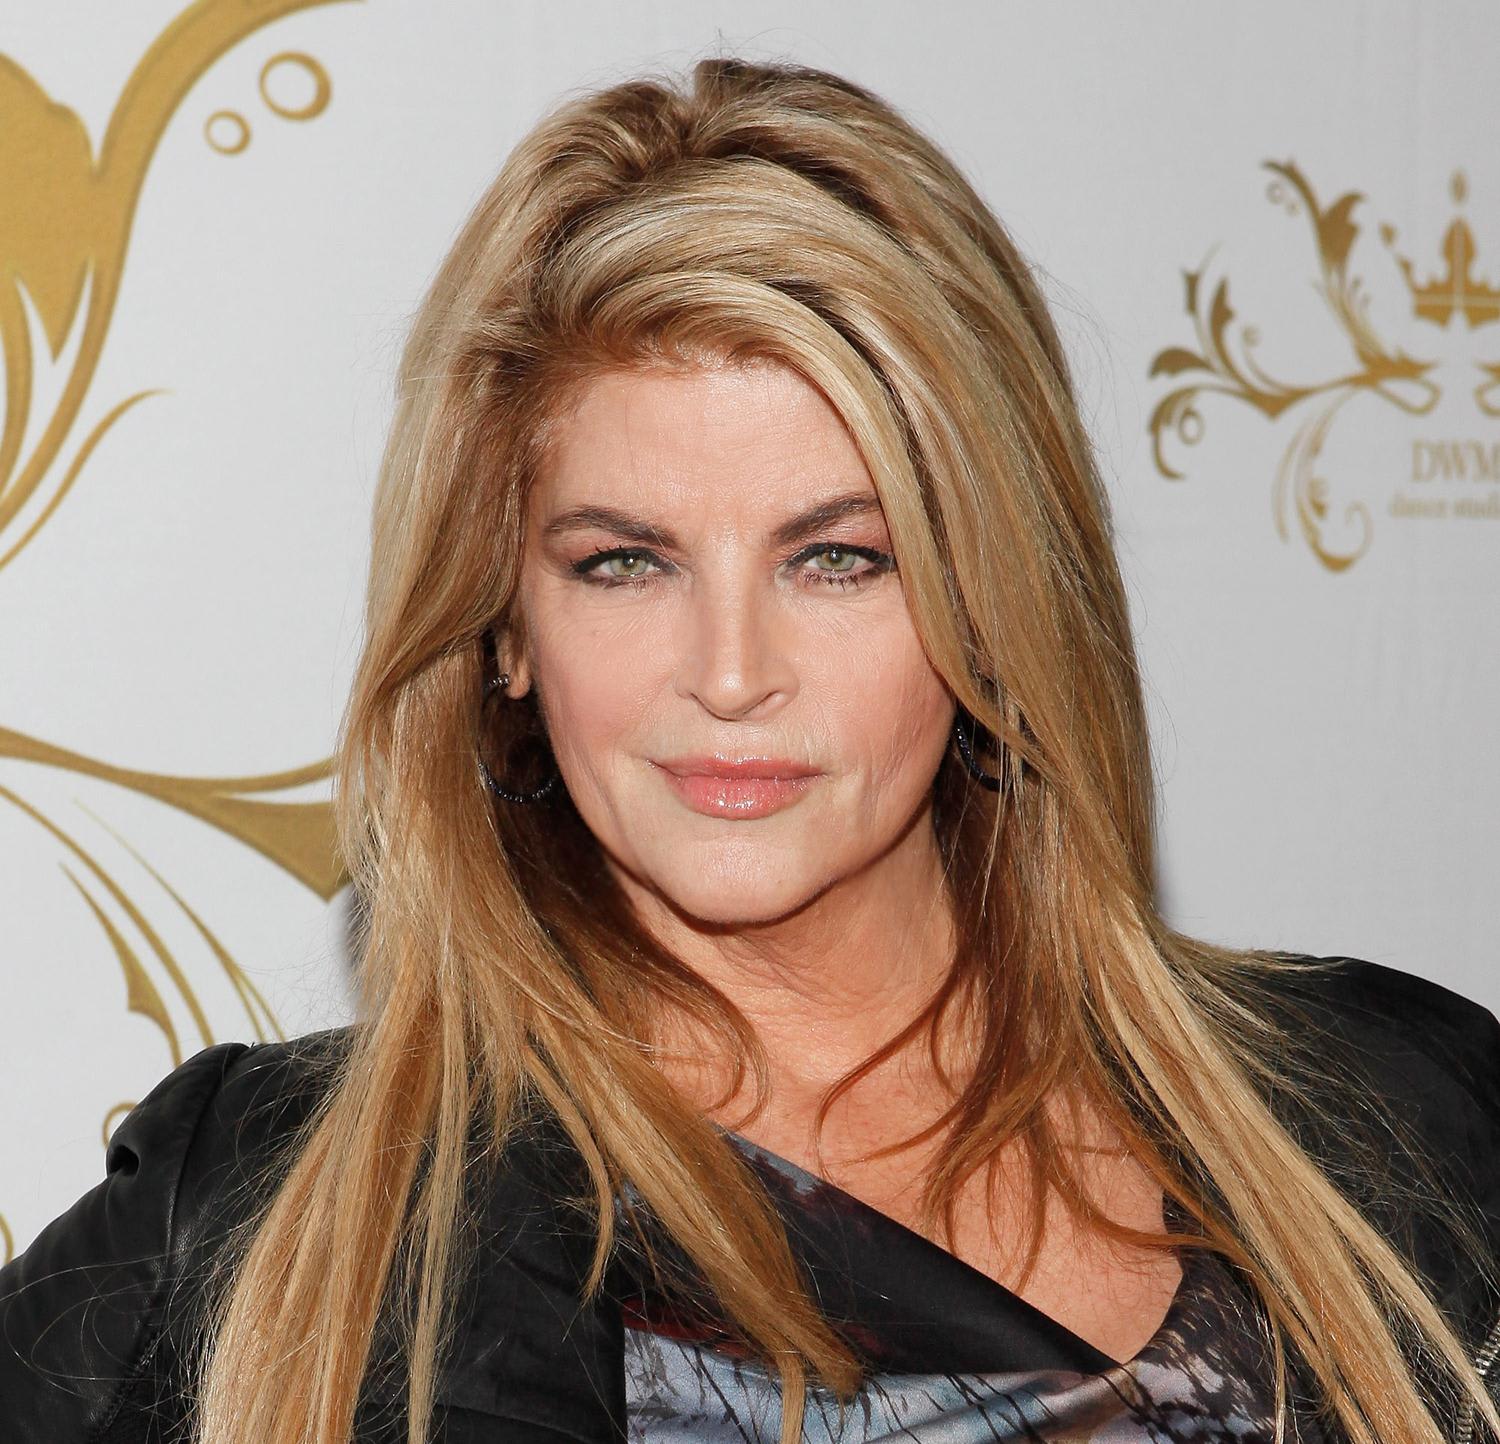 Kirstie Alley Drops 20 Pounds.